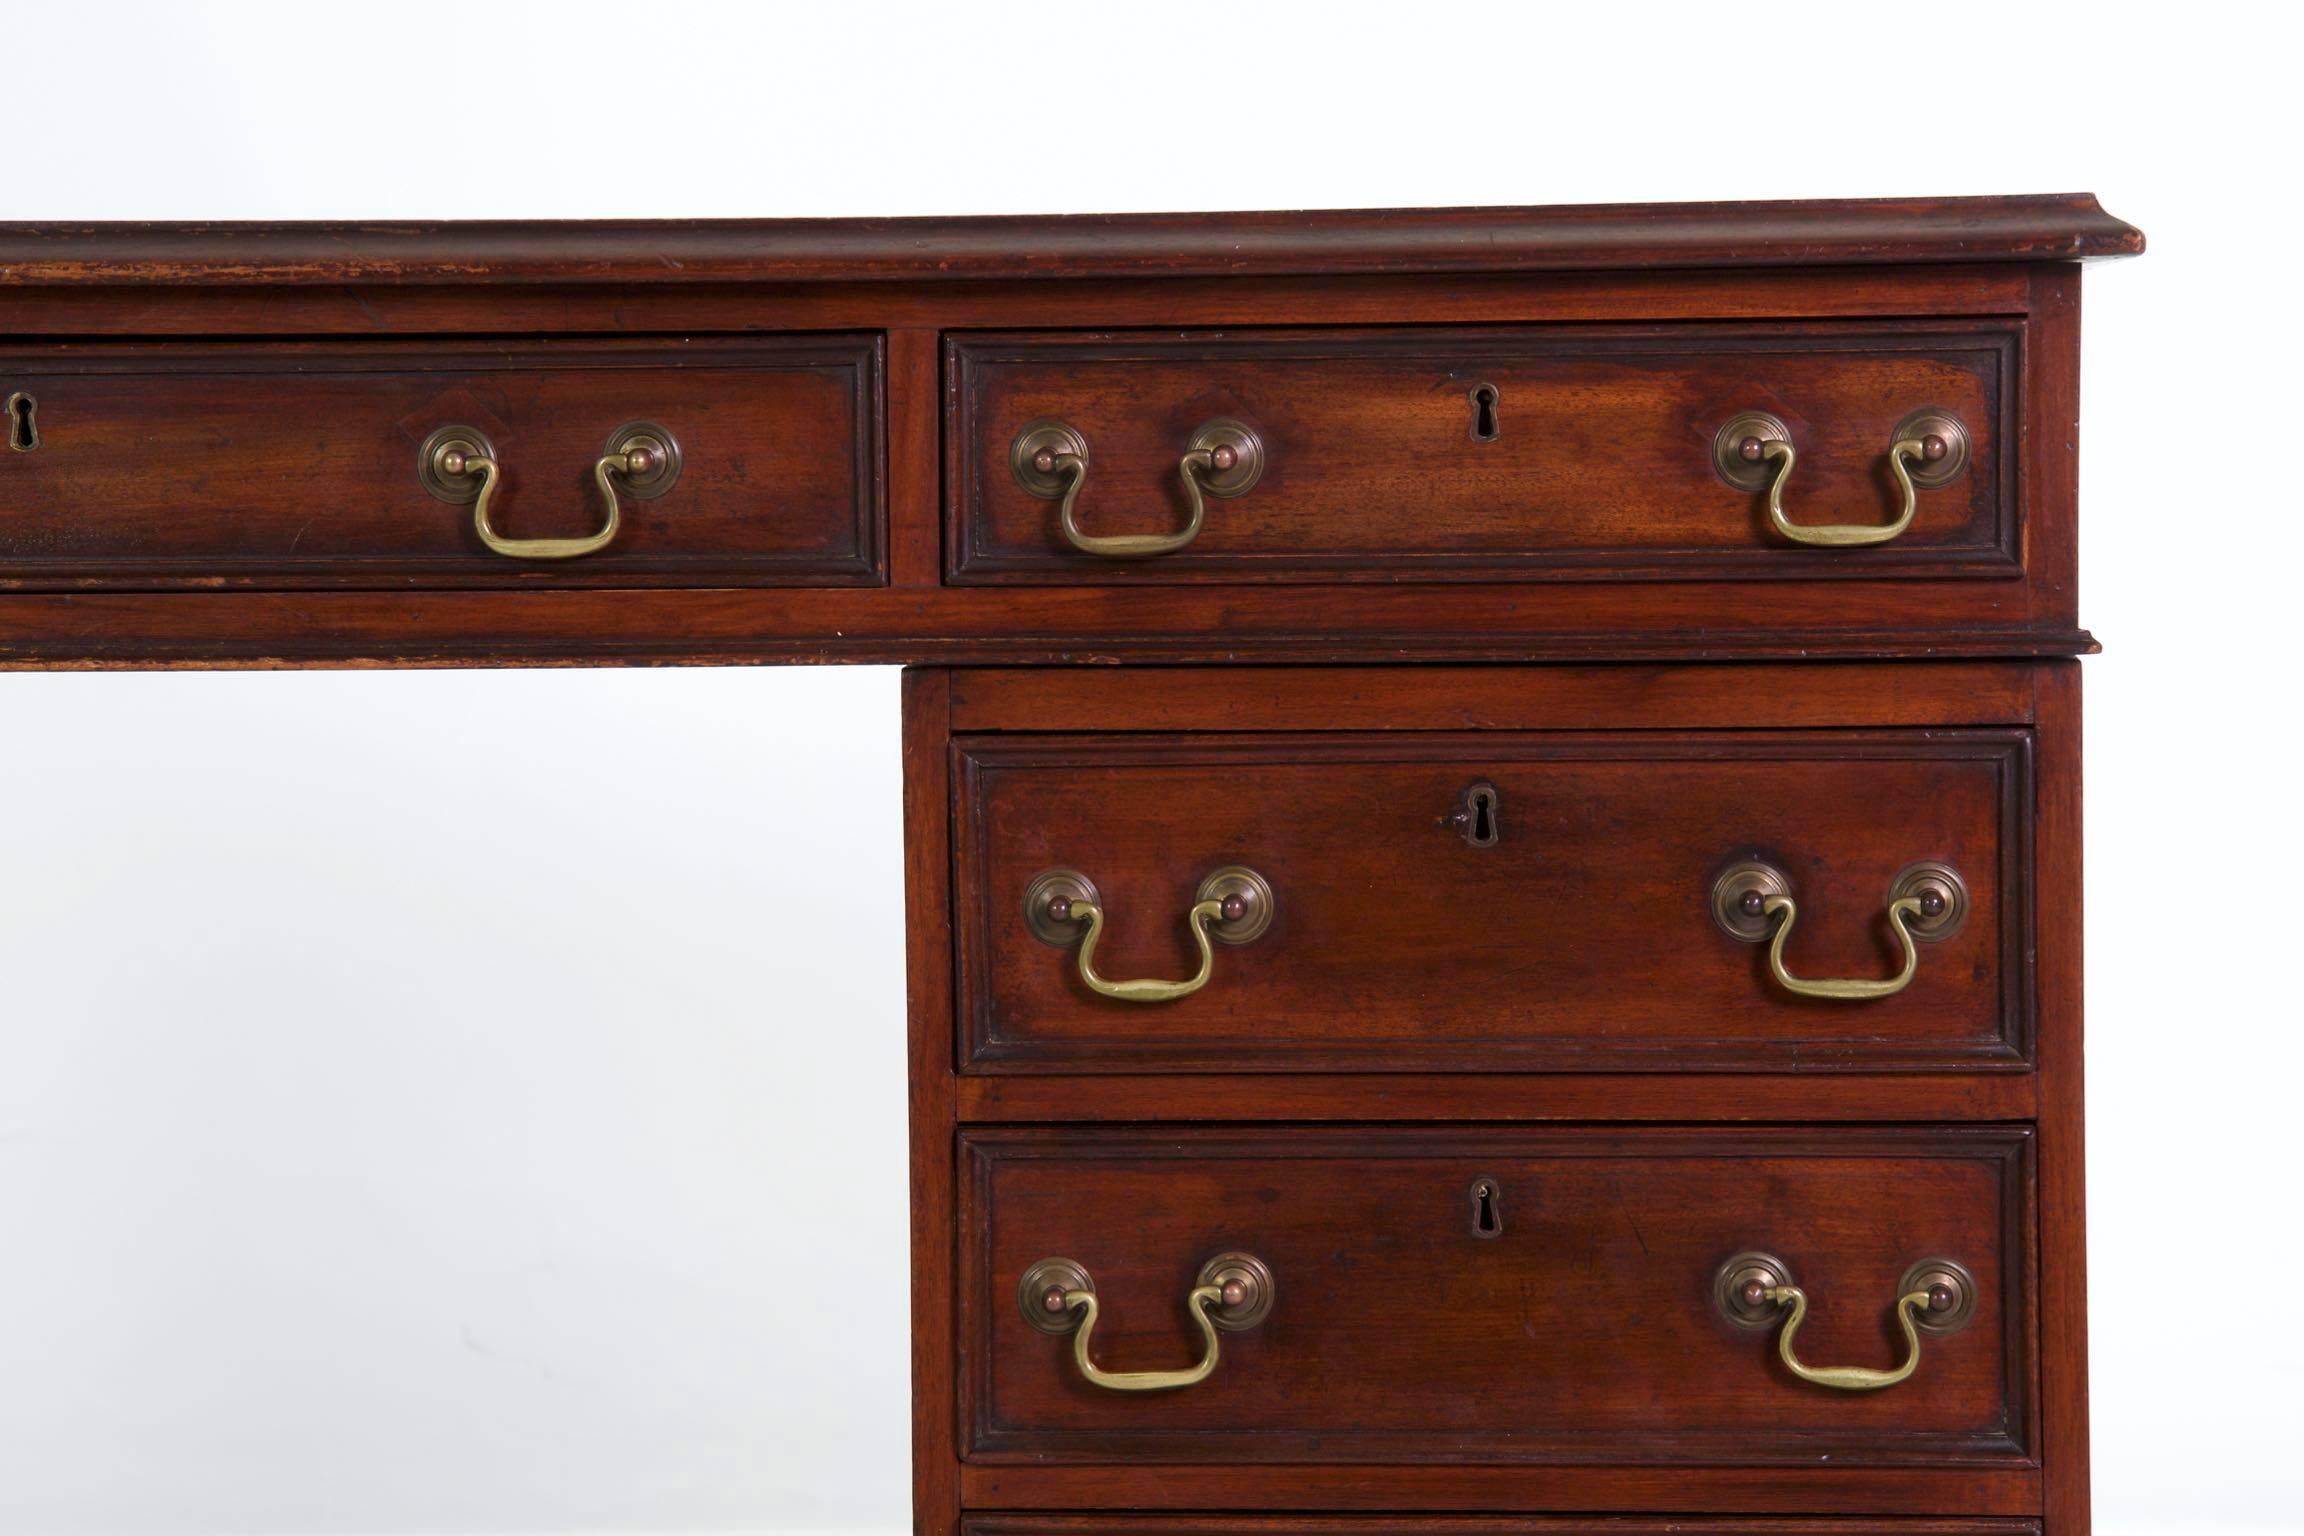 British 20th Century English George III Style Mahogany and Leather Antique Pedestal Desk